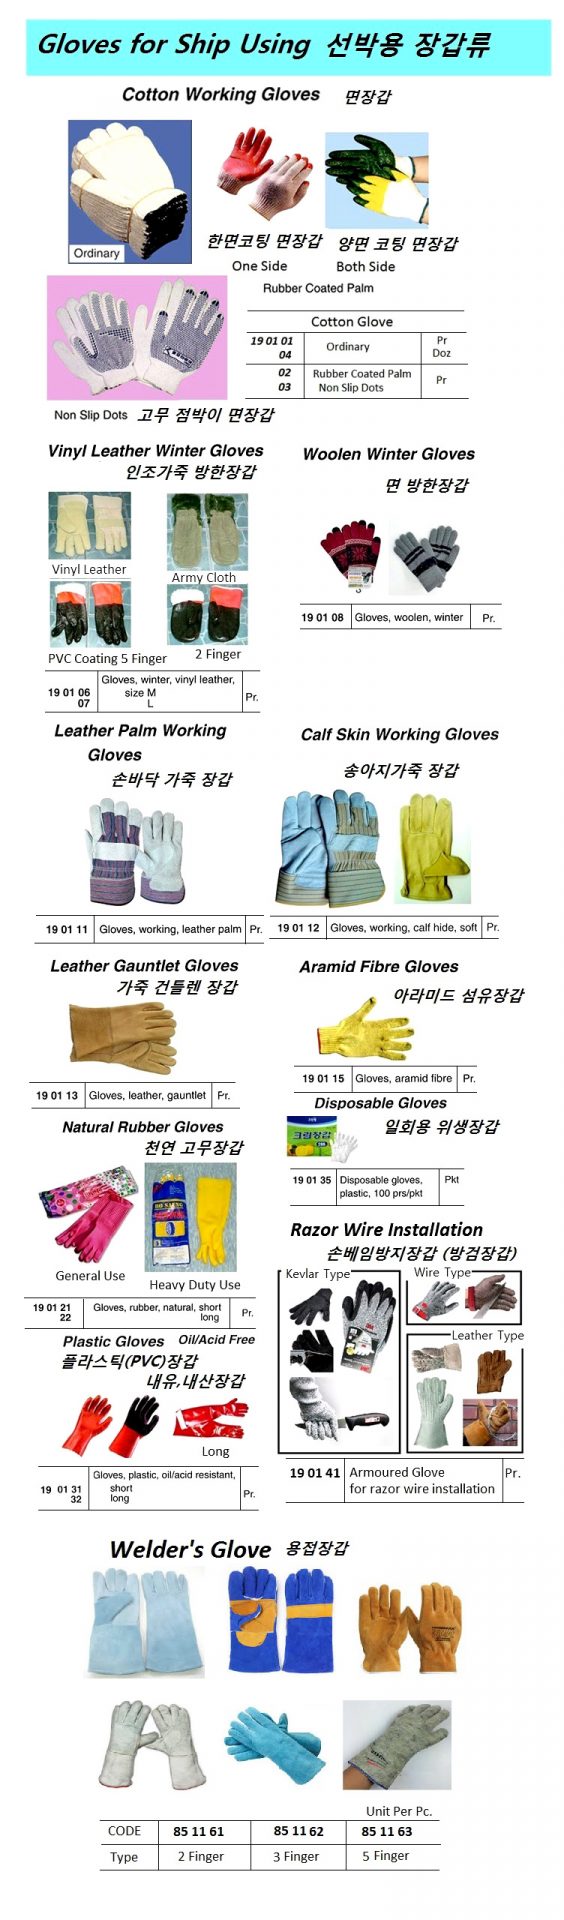 190102-GLOVES WORKING COTTON, RUBBER COATED PALM